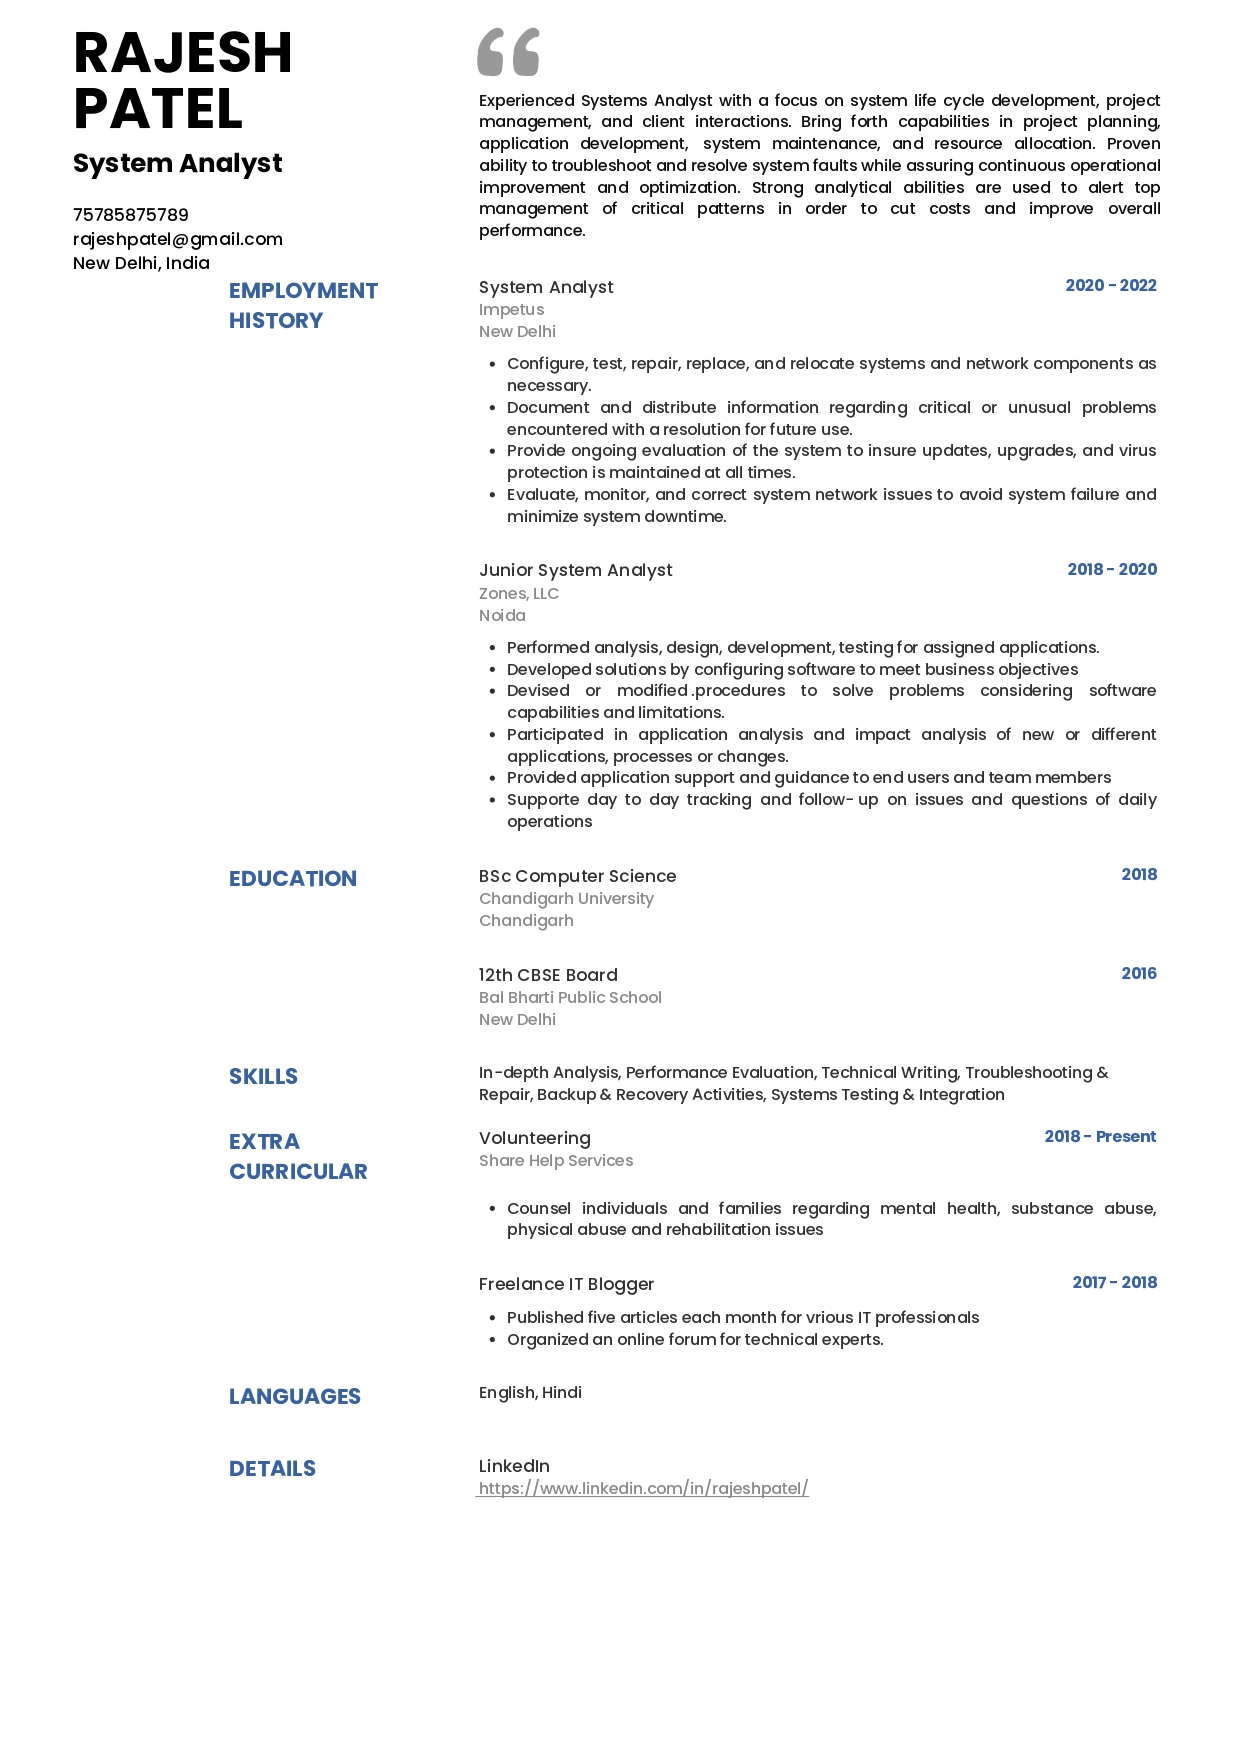 Sample Resume of System Analyst | Free Resume Templates & Samples on Resumod.co